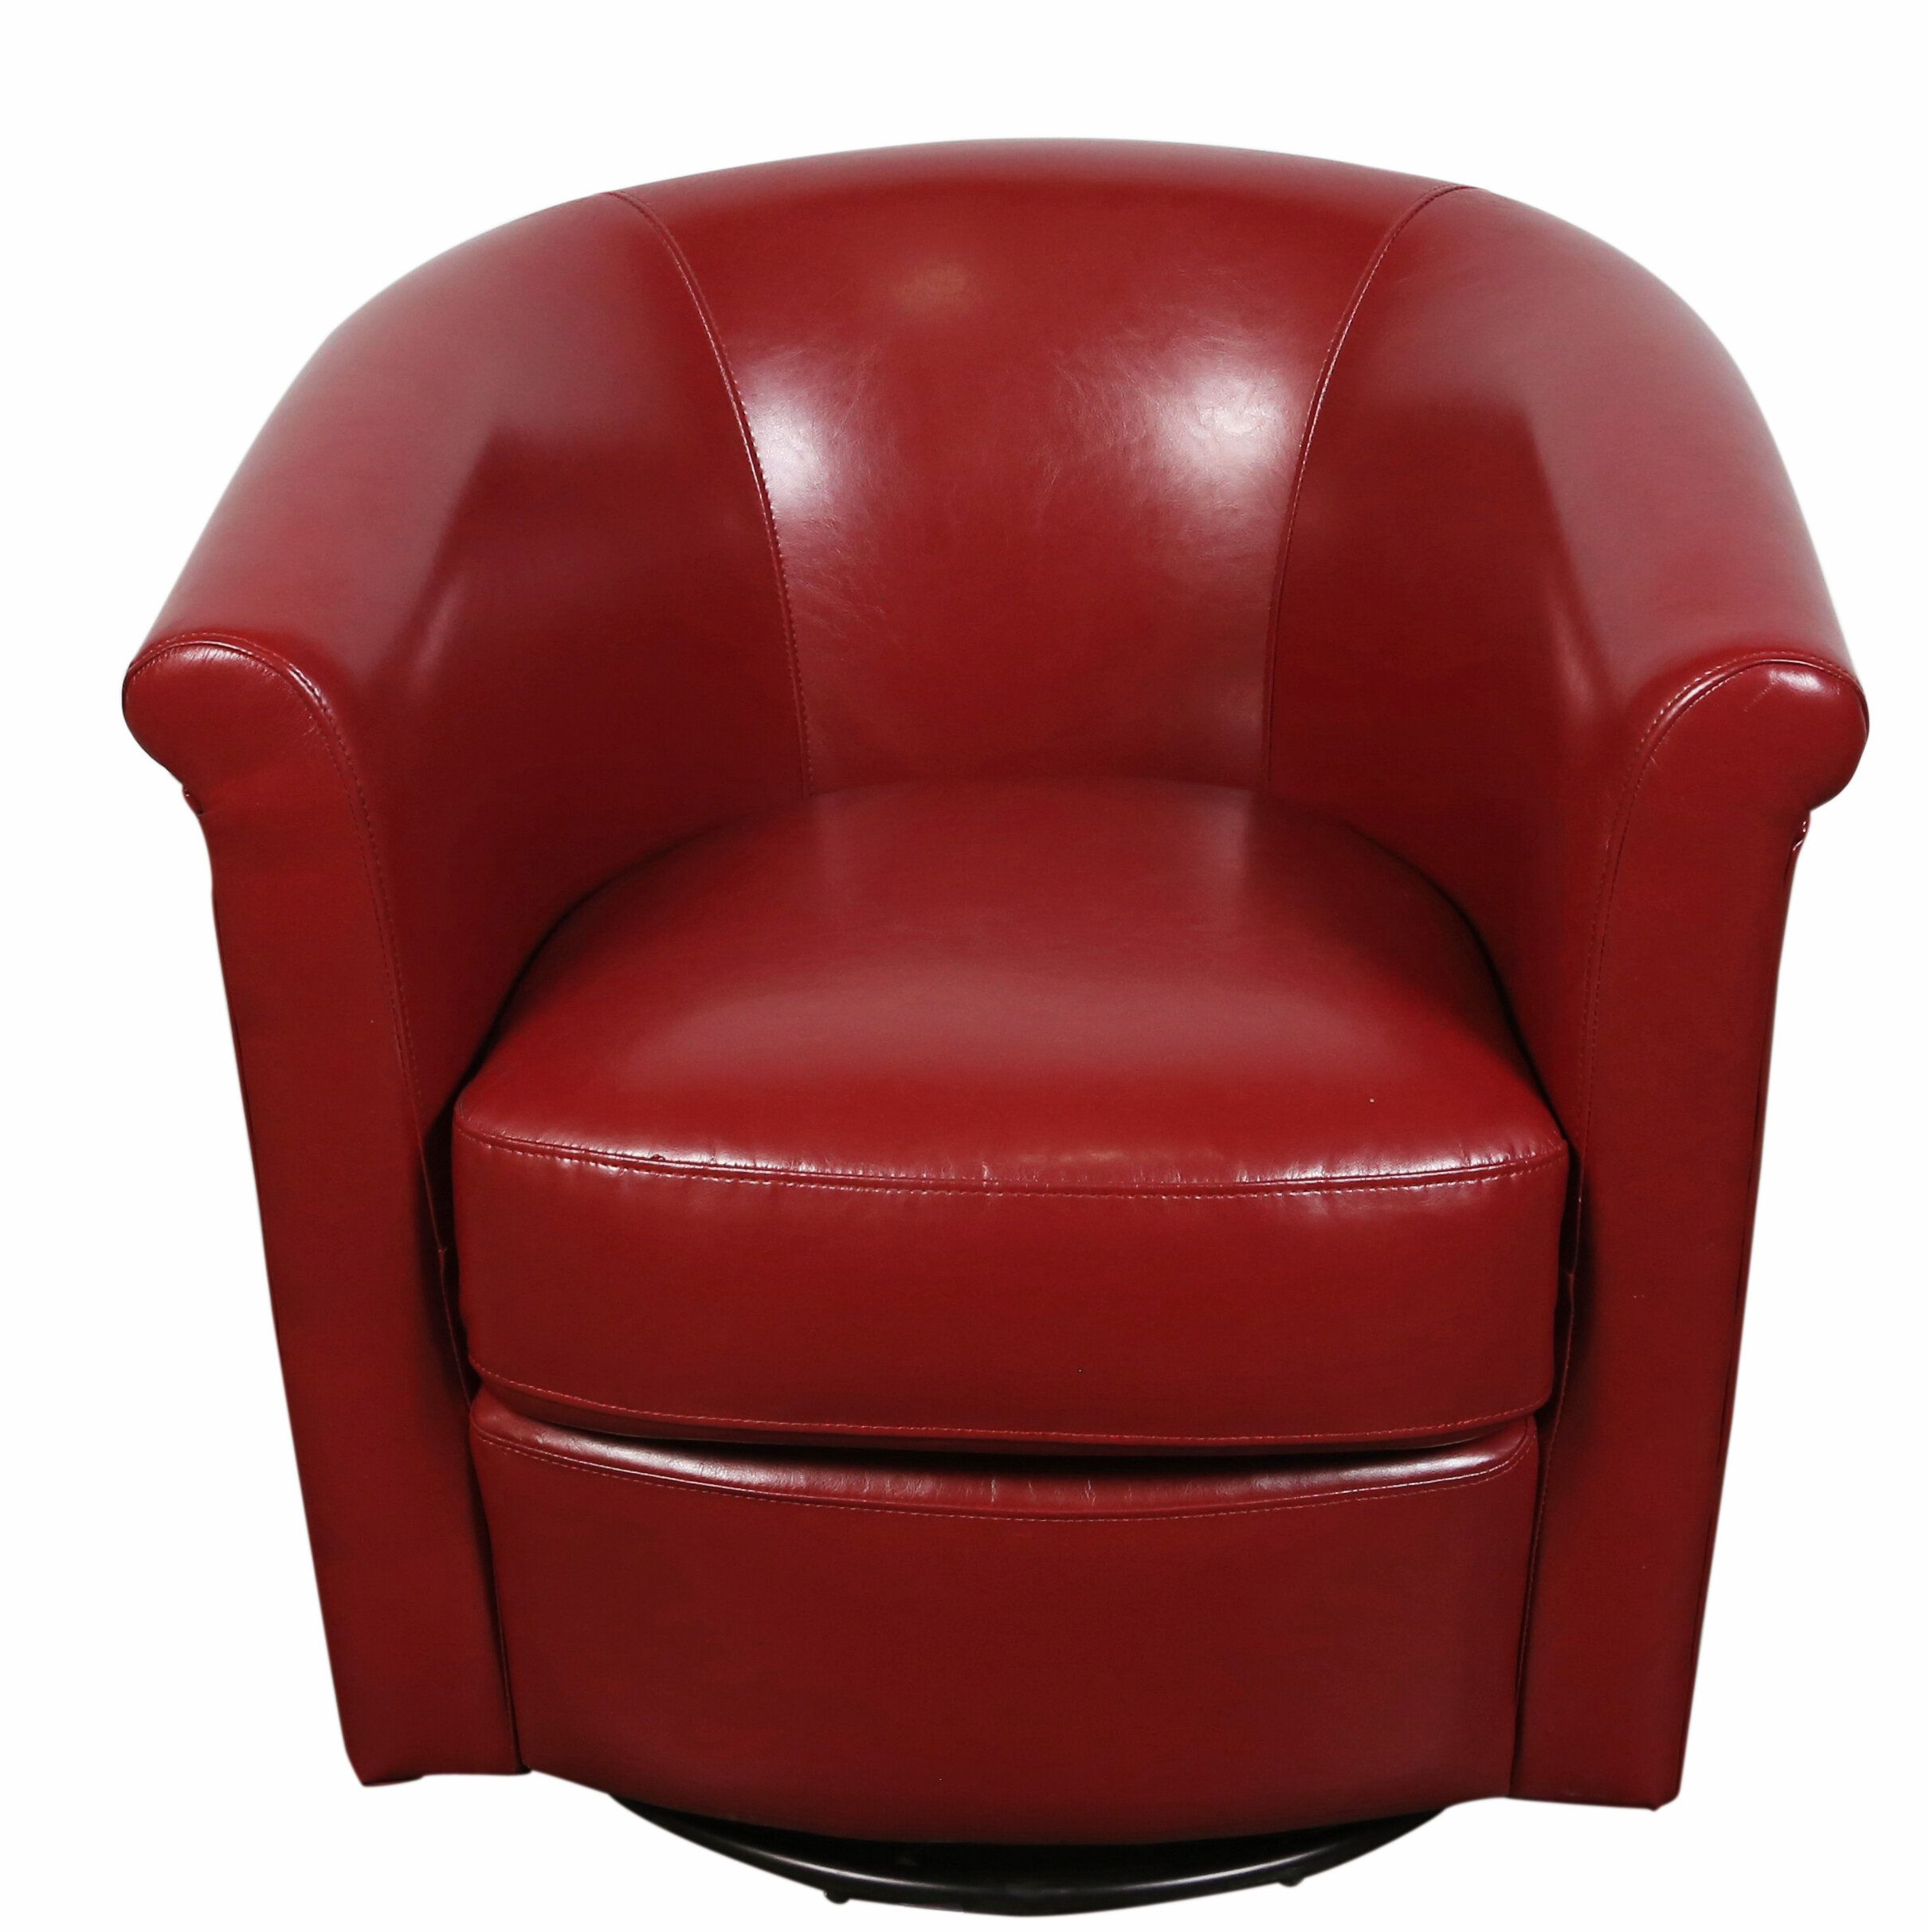 30" W Faux Leather Swivel Barrel Chair Intended For Ronda Barrel Chairs (View 11 of 15)